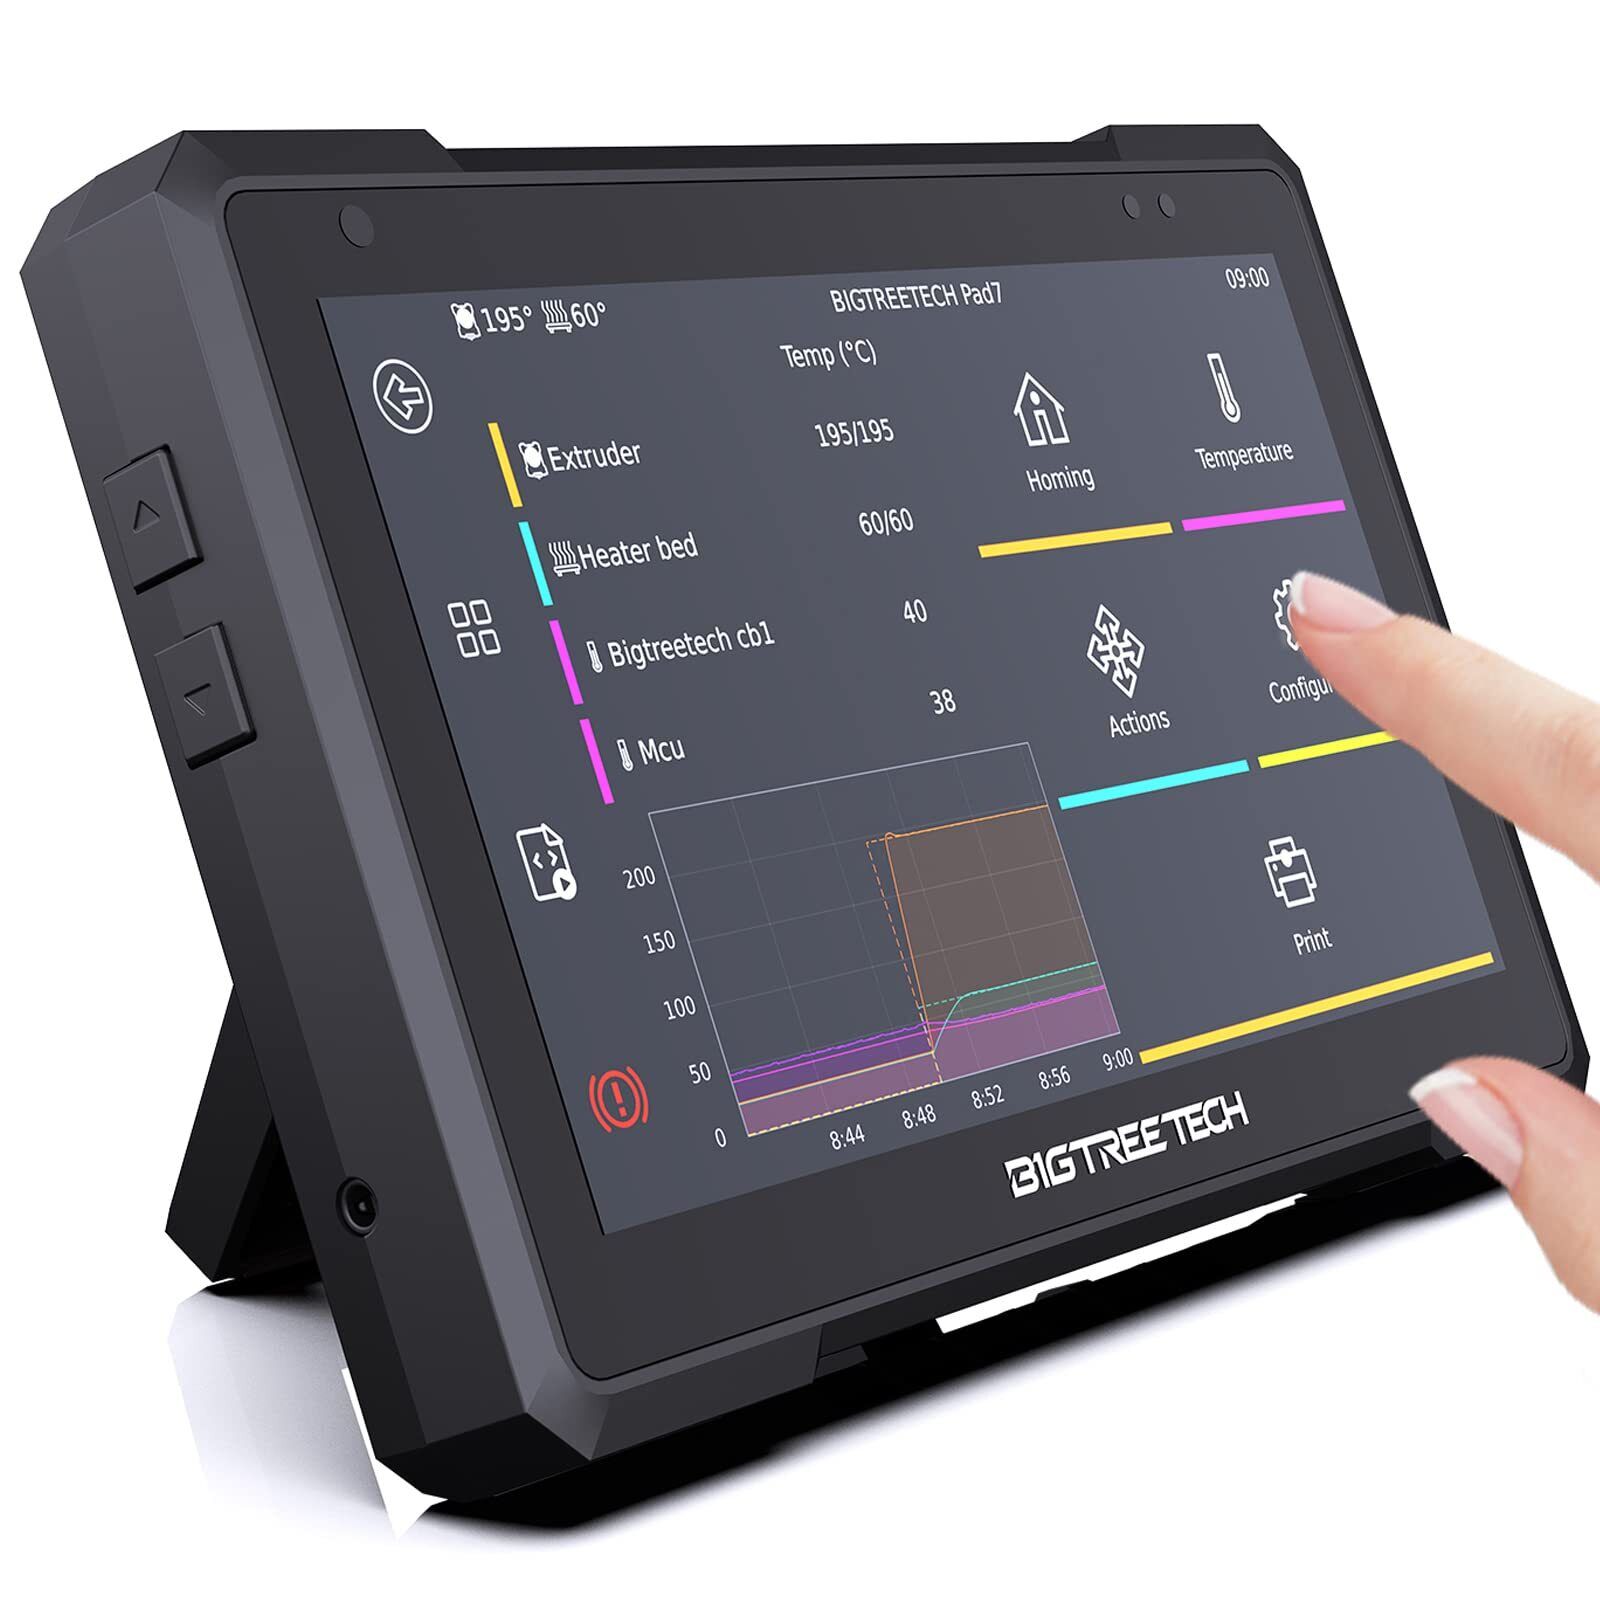 BIGTREETECH Pad 7 Klipper Touch Screen 7 Inch 3D Printing Smart Pad Open-Source